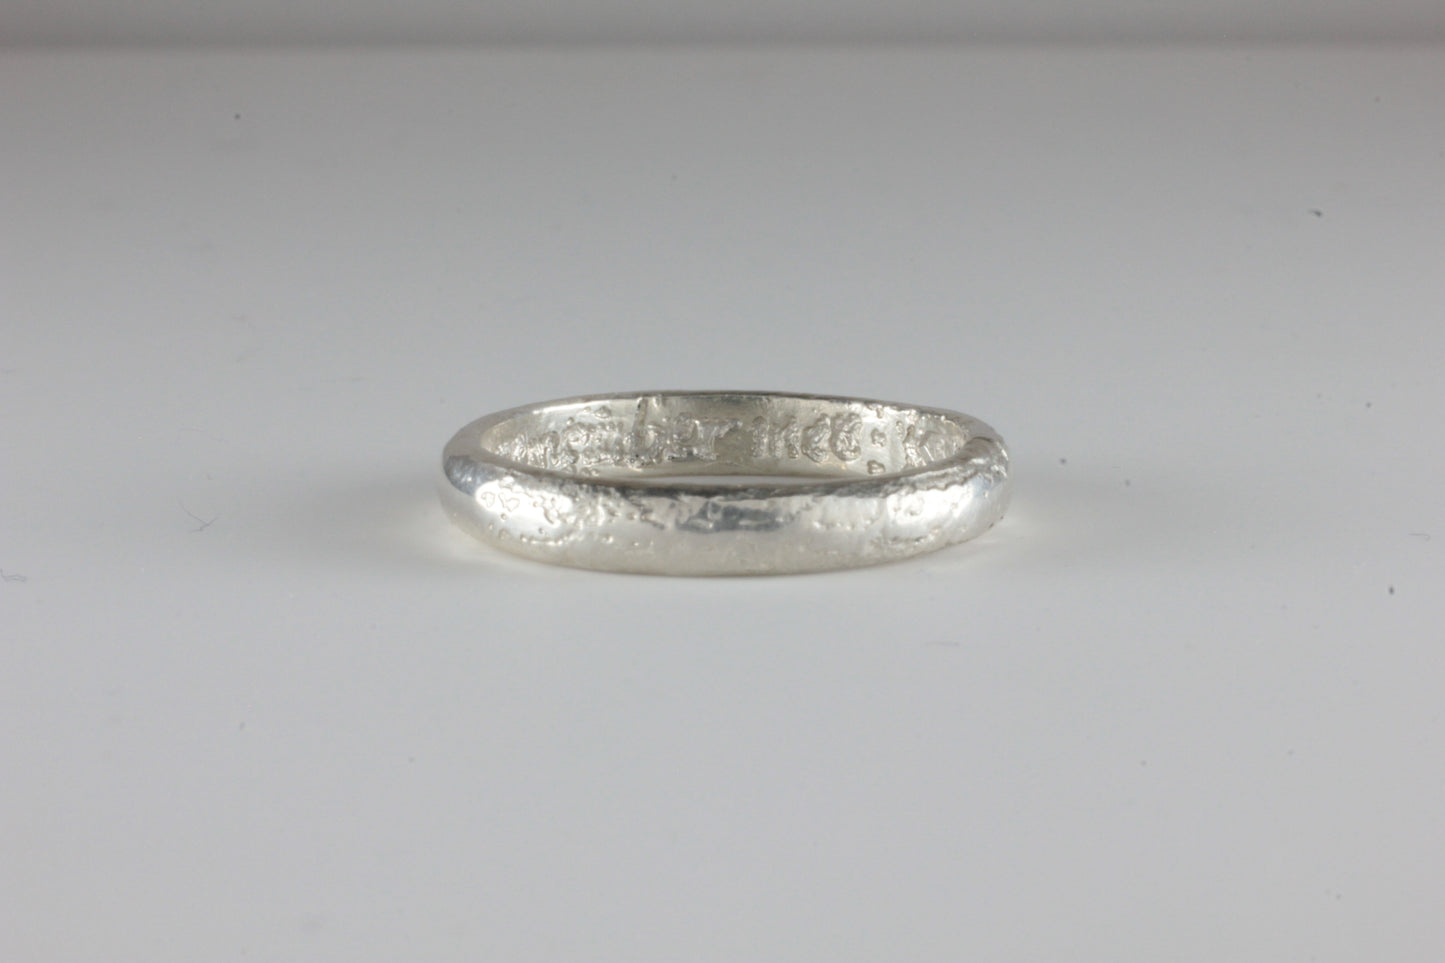 'When this you see, remember mee' Medieval Posy Ring